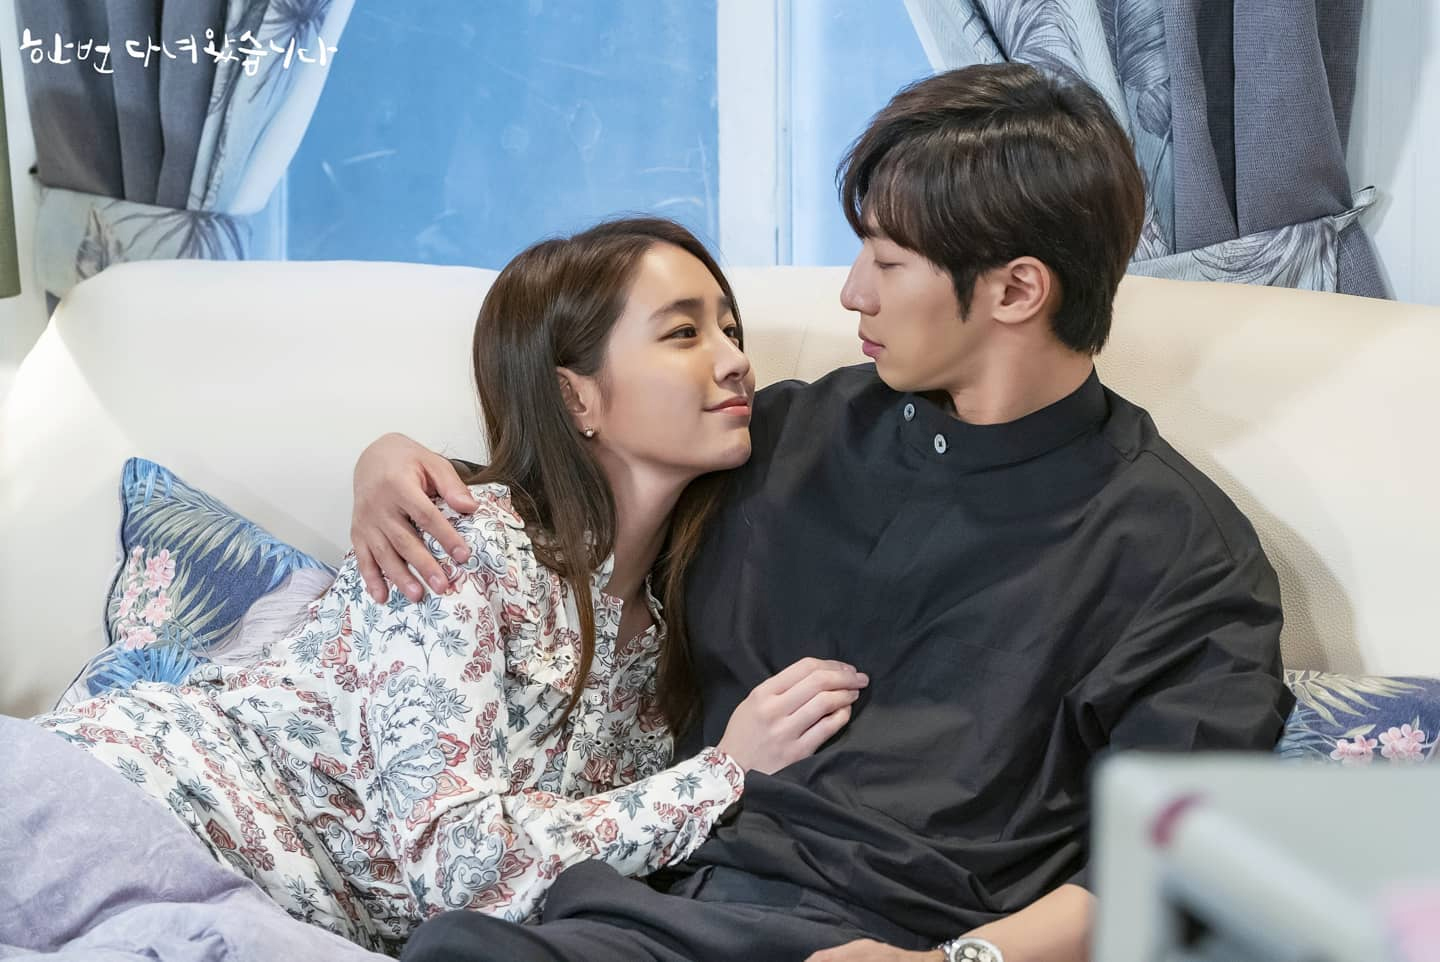 Lee Min Jung And Lee Sang Yeob Cuddle Up On A Romantic Home Date In Once Again